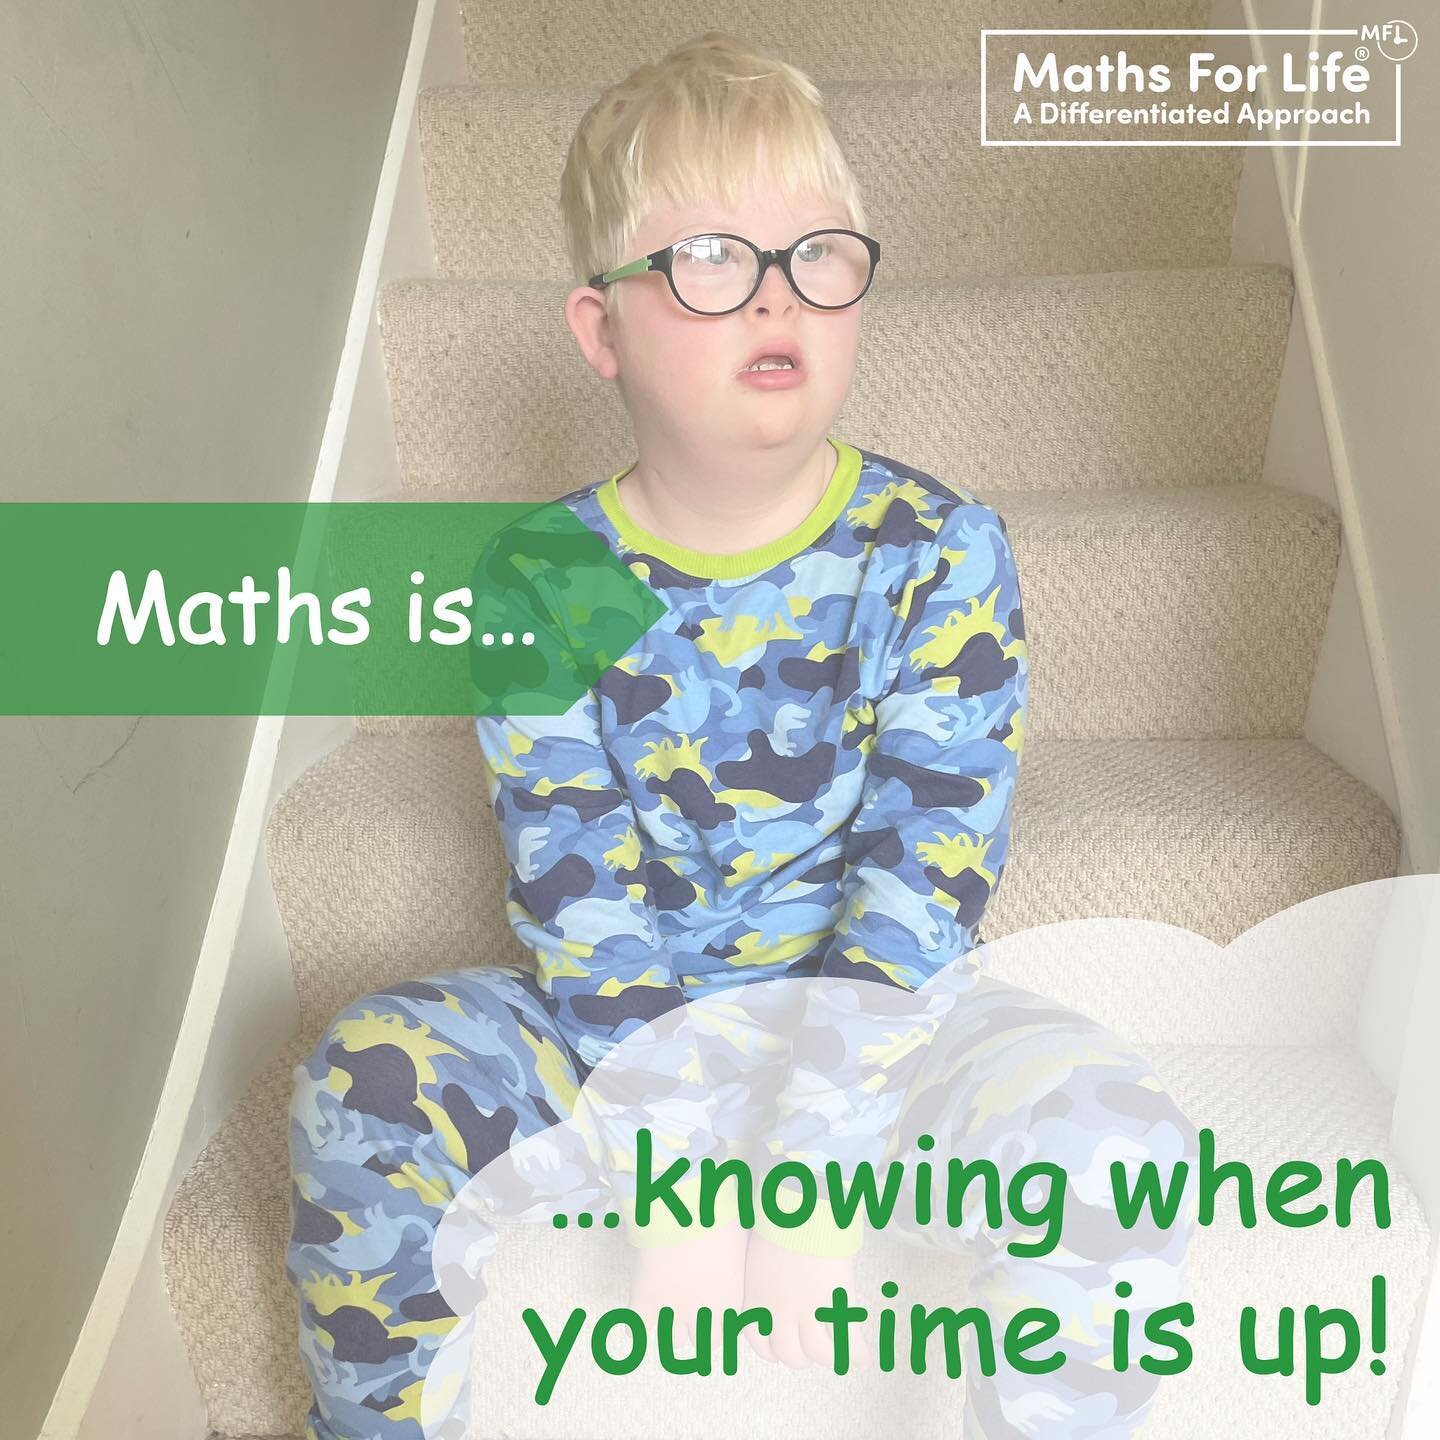 Maths is knowing when your time is up!

Boris, Lance can come explain this to you if you want&hellip;

➕➖➗✖️🦹&zwj;♀️🤓❤️MATHS
Be different, #lovemaths #mathsforlife

#Mathsis&hellip; #Timeisup
#specialeducationalneeds #learningdifficulties #differen